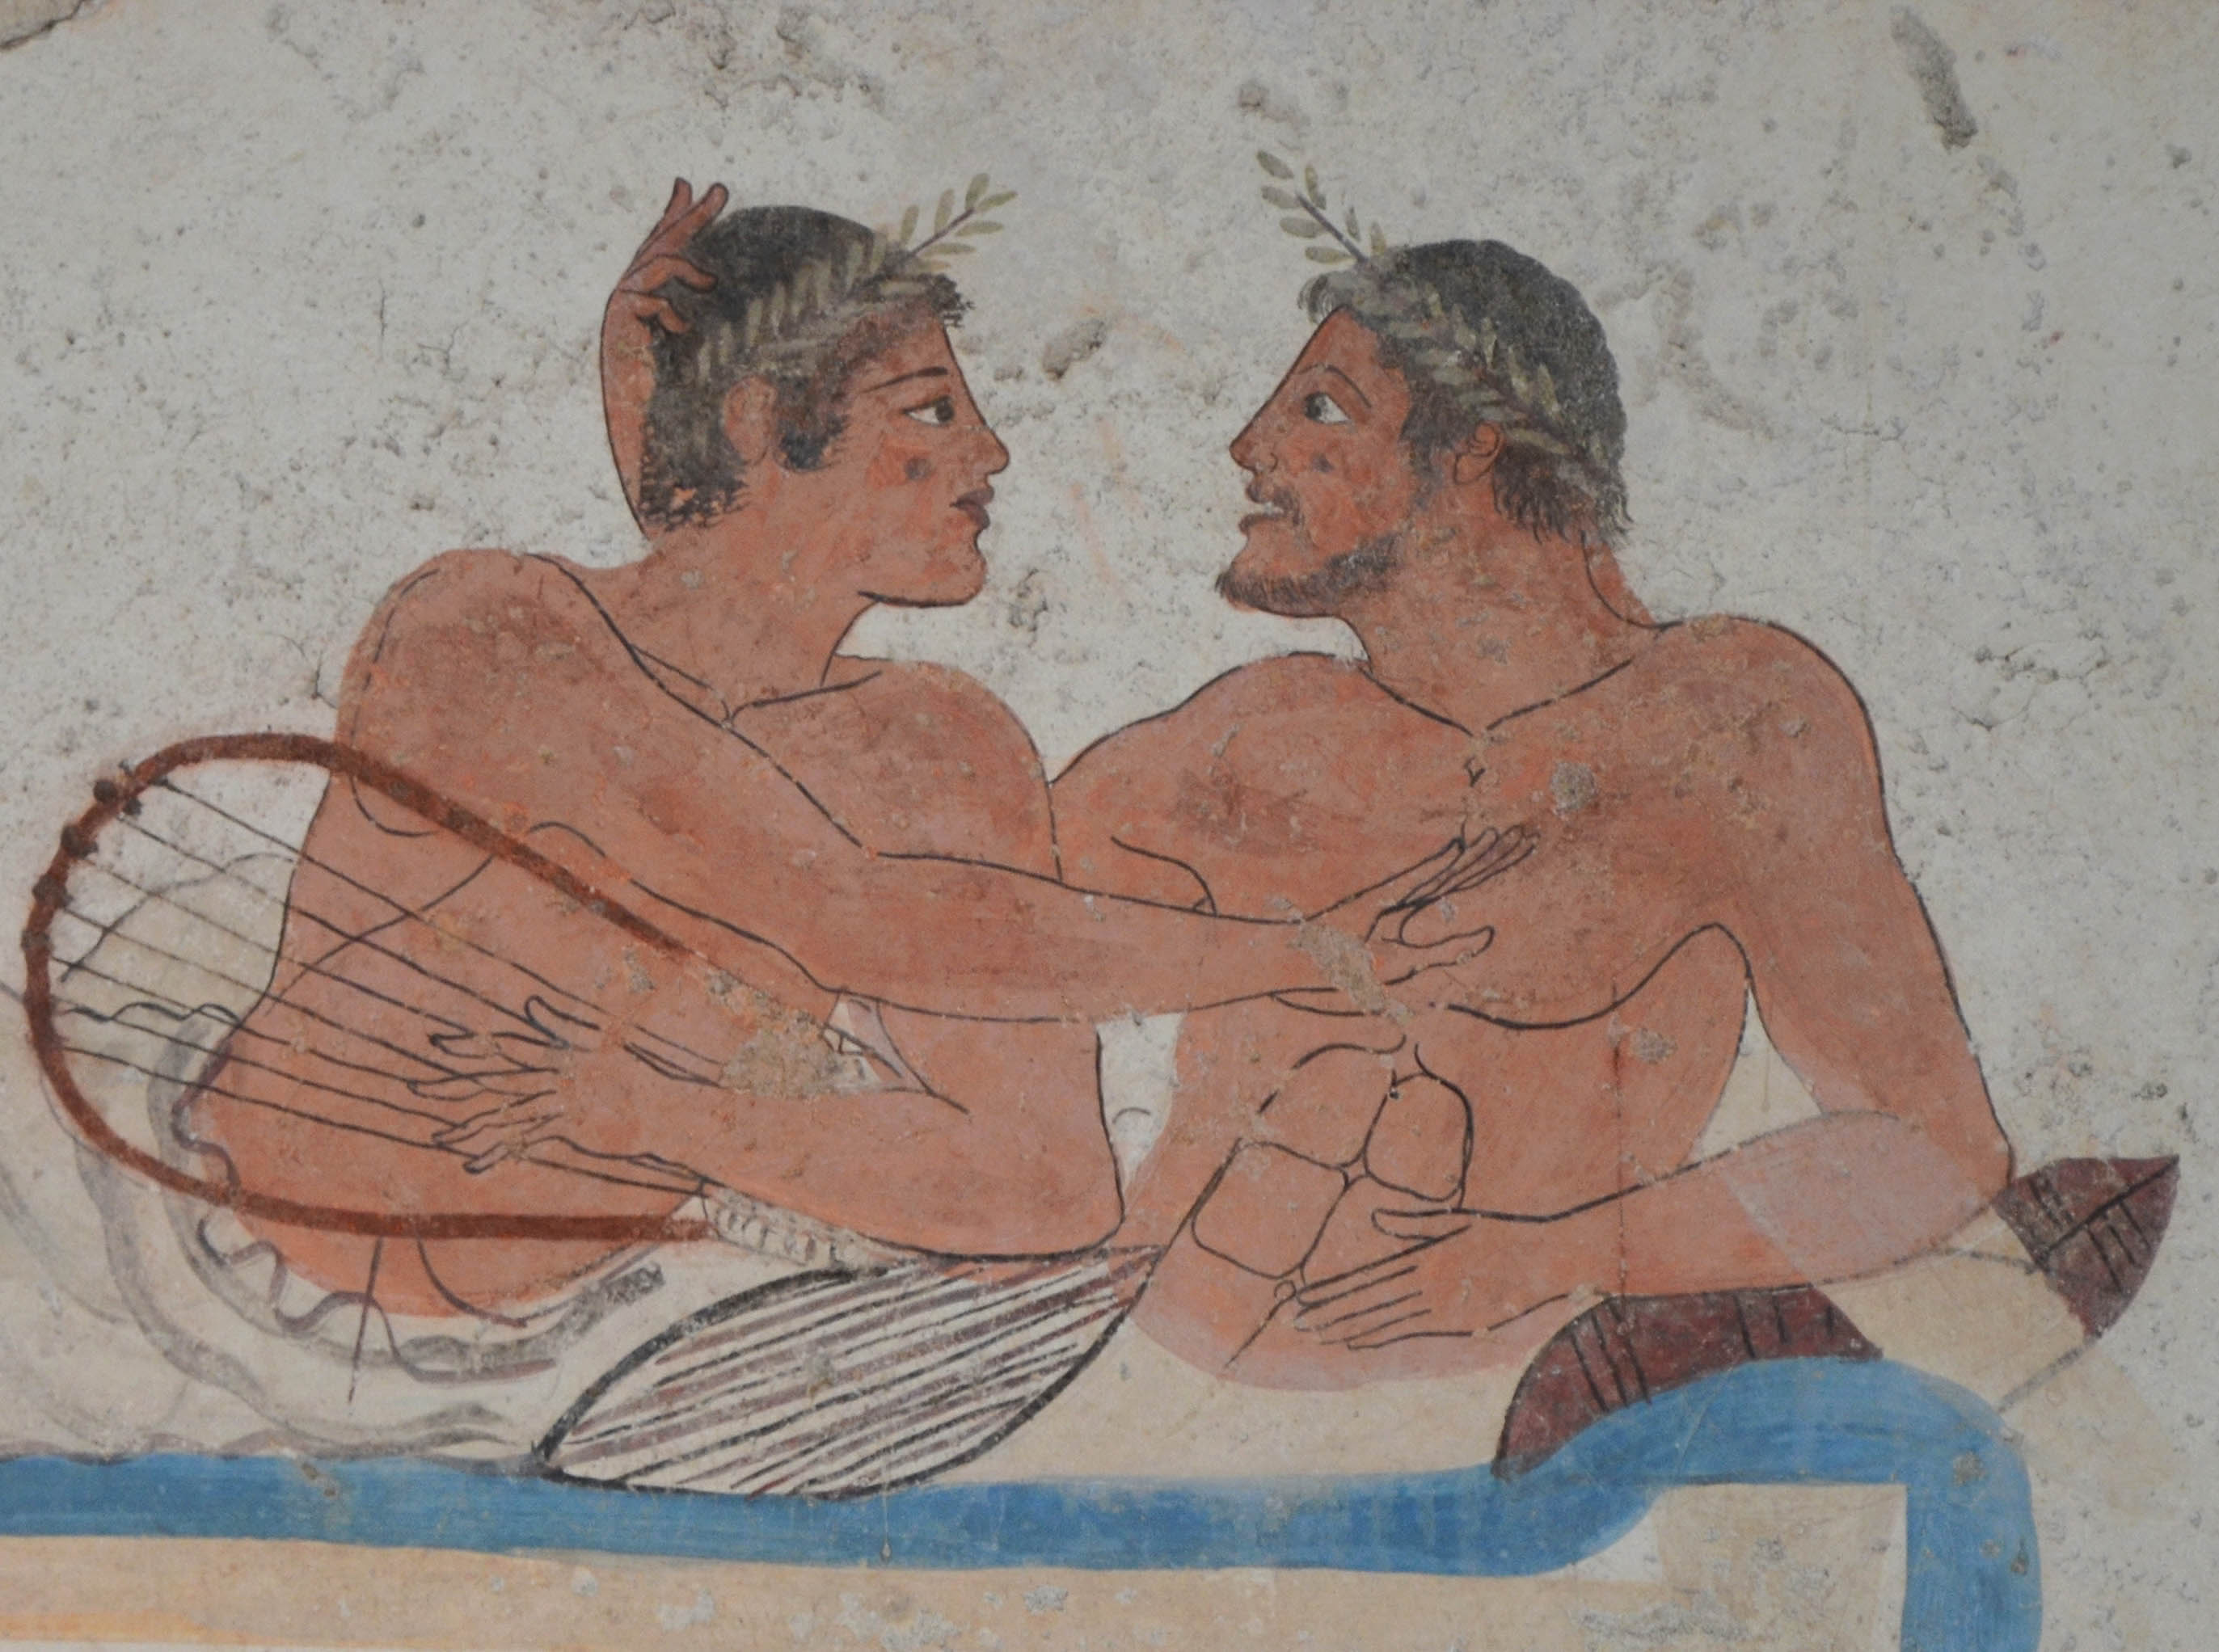 Anal Sex With Sleeping Girl - Pederasty in ancient Greece - Wikipedia